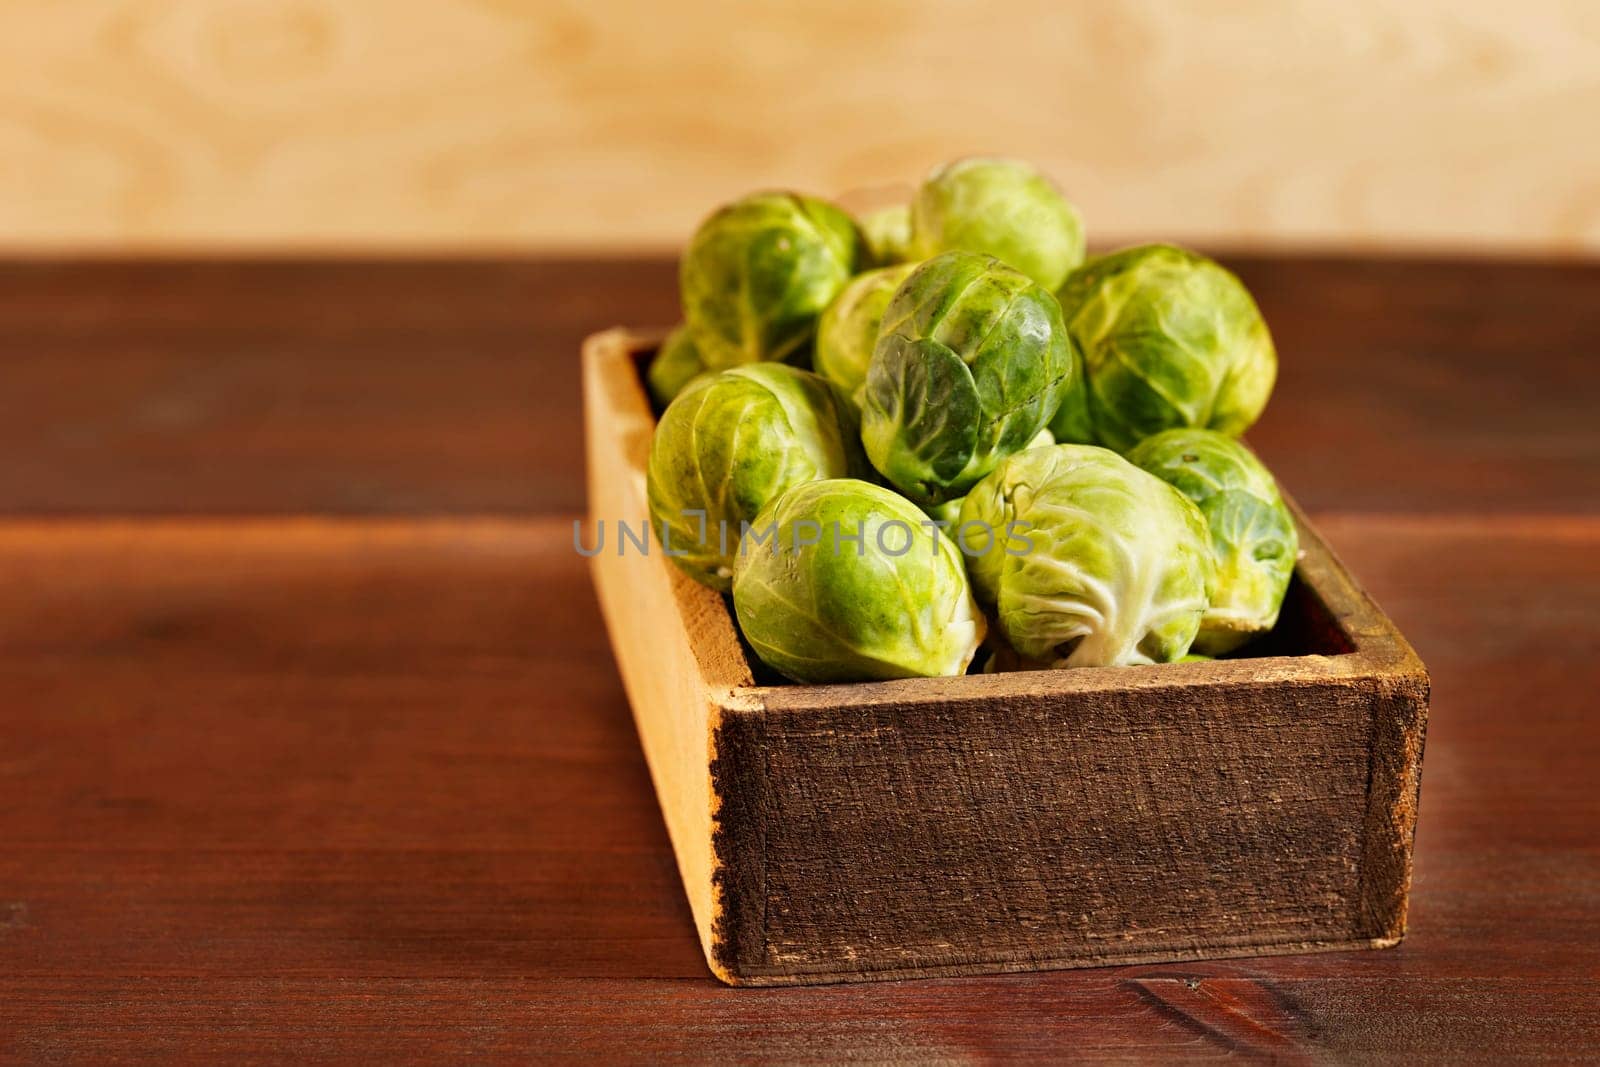 Green Brussel sprouts in box by victimewalker